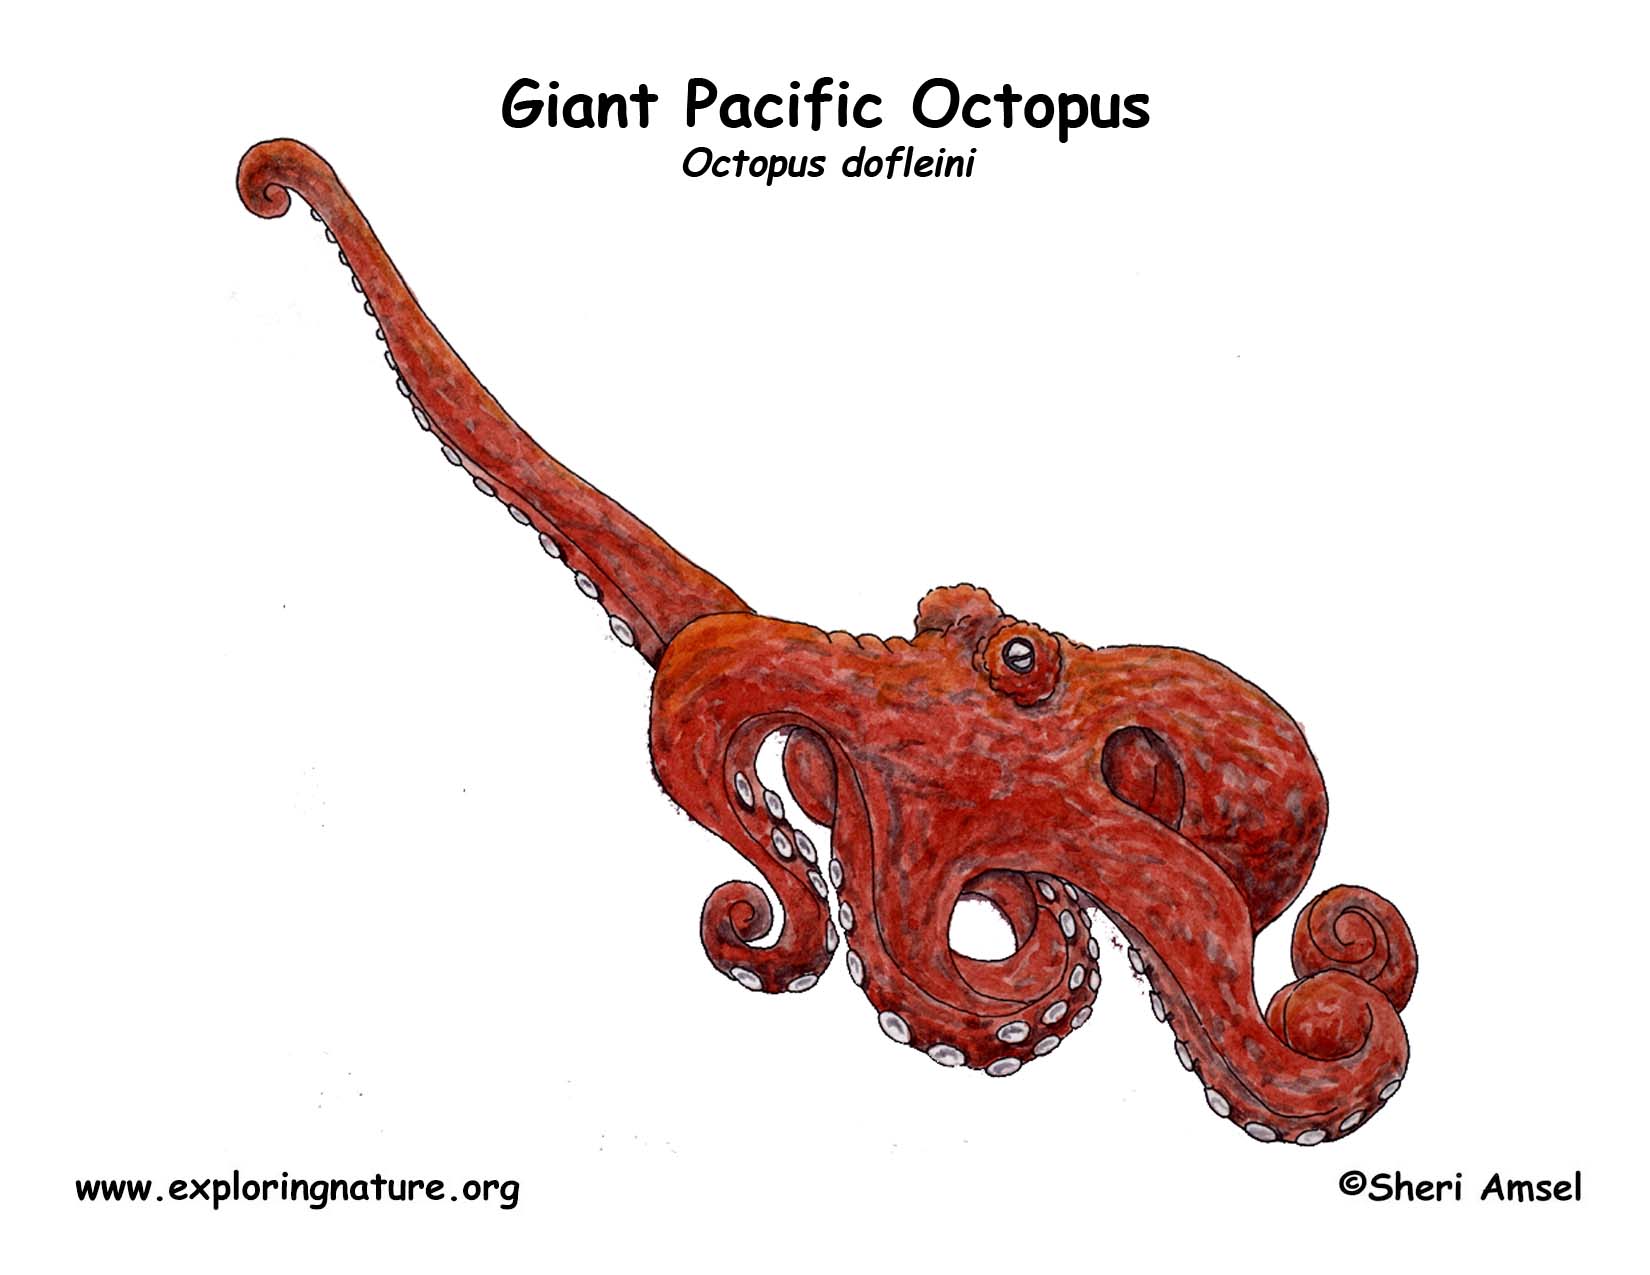 Octopus (Giant Pacific)